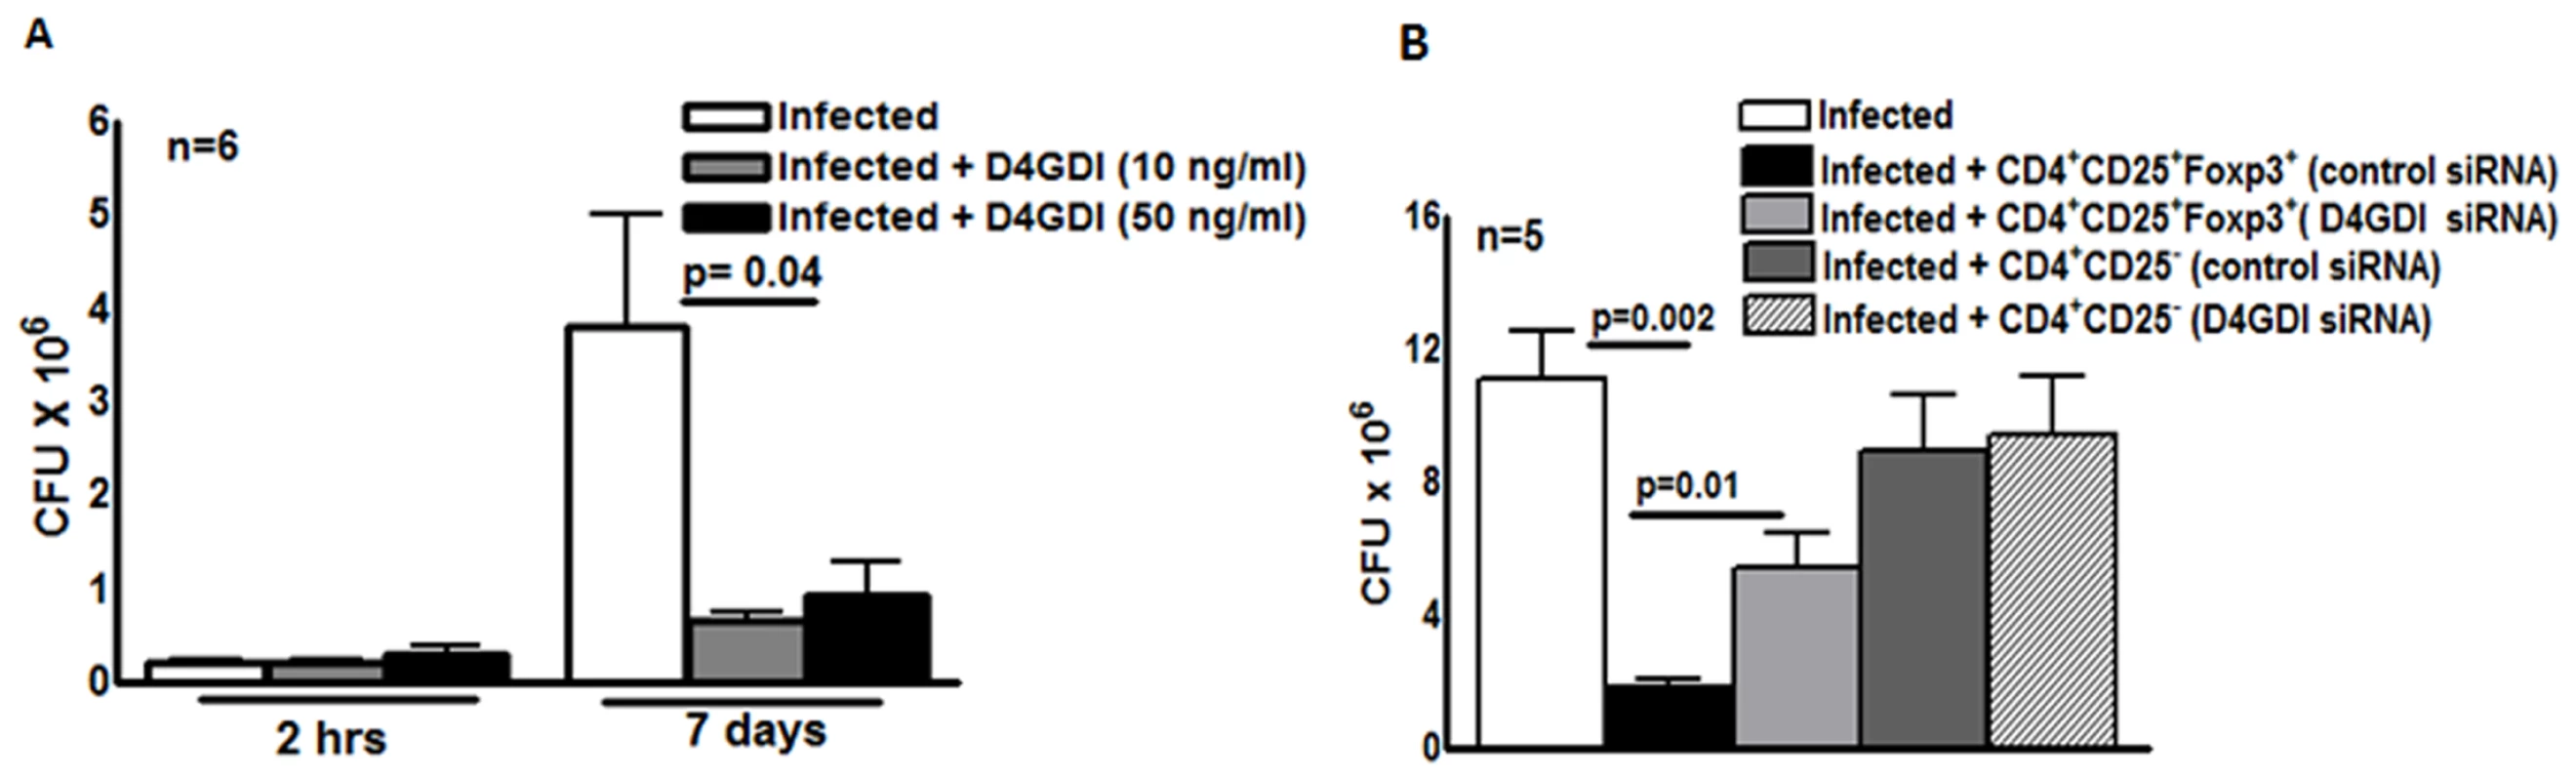 D4GDI inhibits growth of <i>M. tb</i> in macrophages.